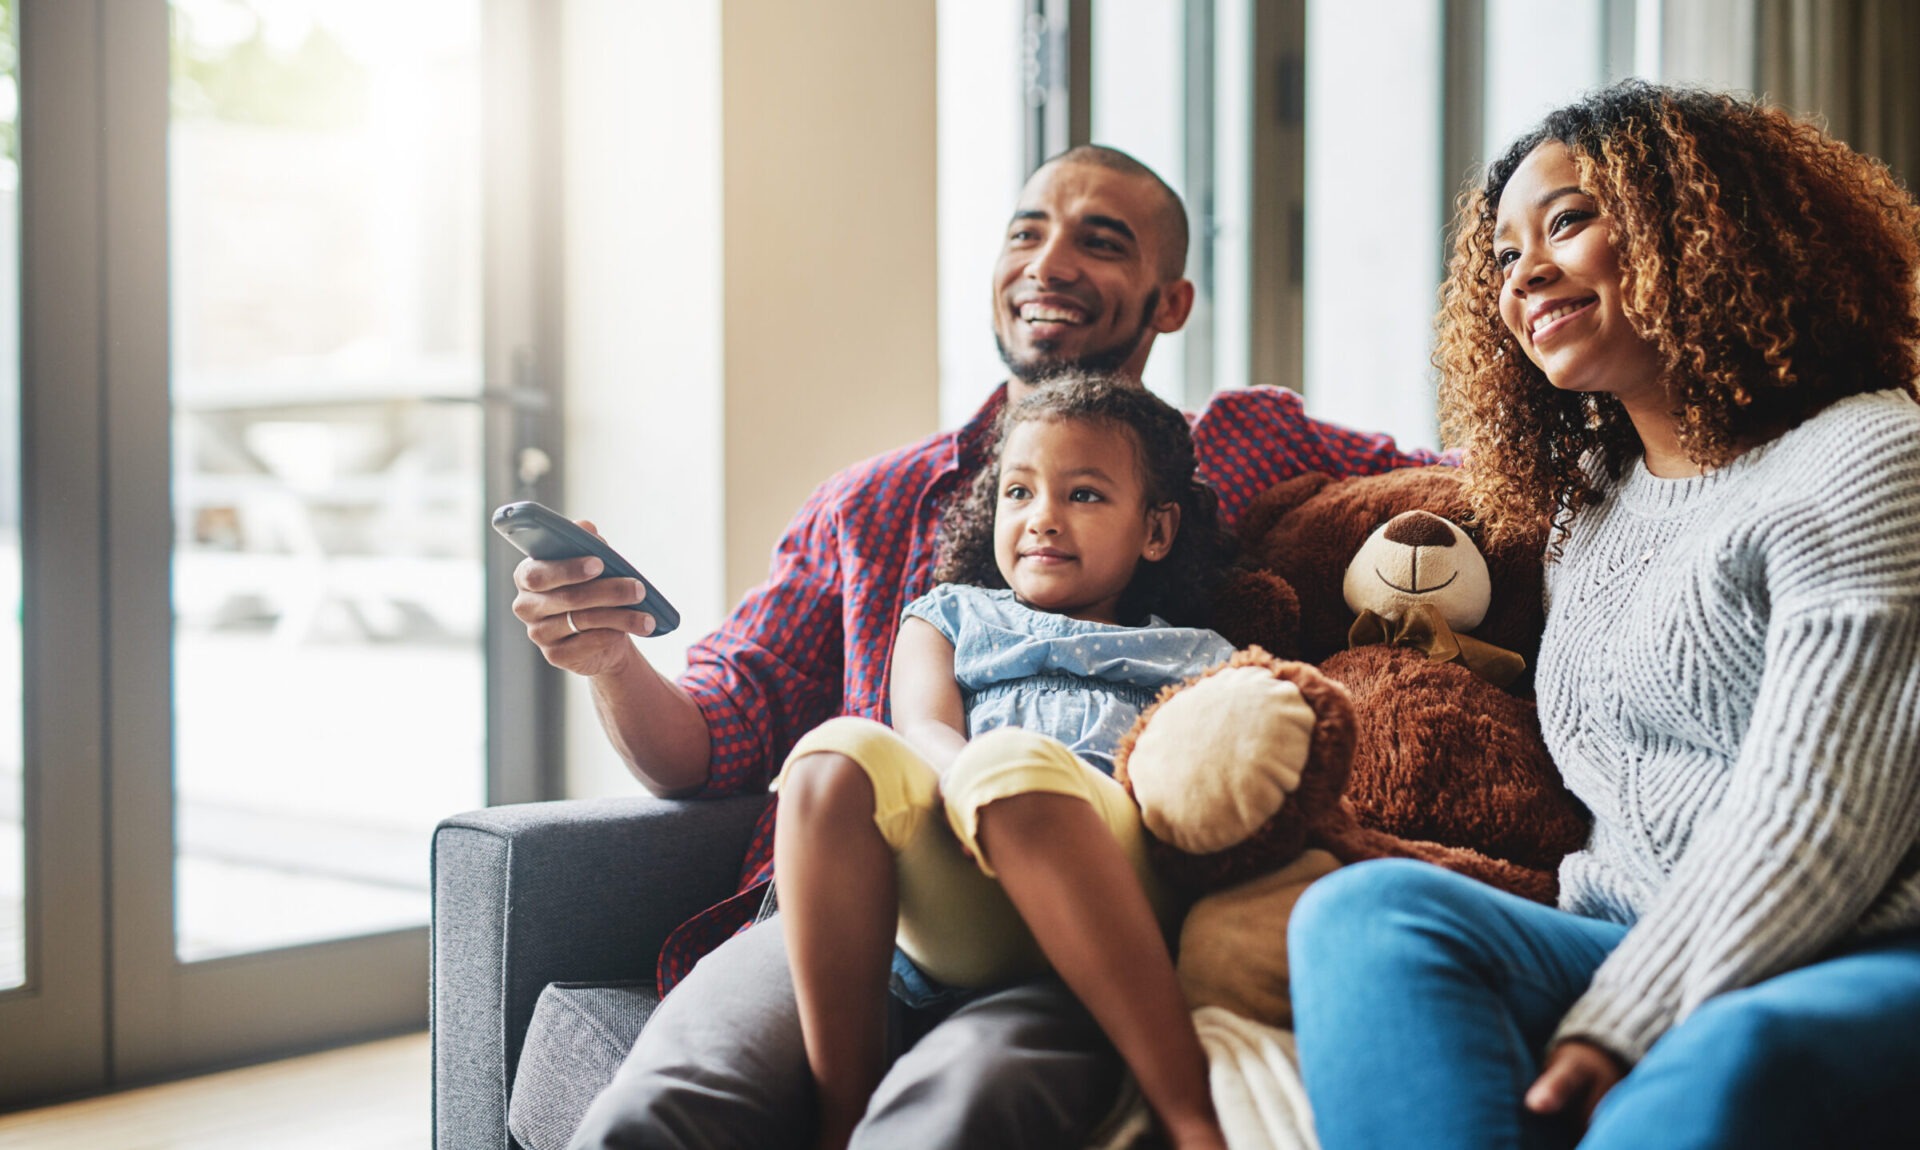 A family of three, two adults and a child, are sitting together comfortably with a teddy bear, while the person holds a remote, smiling.